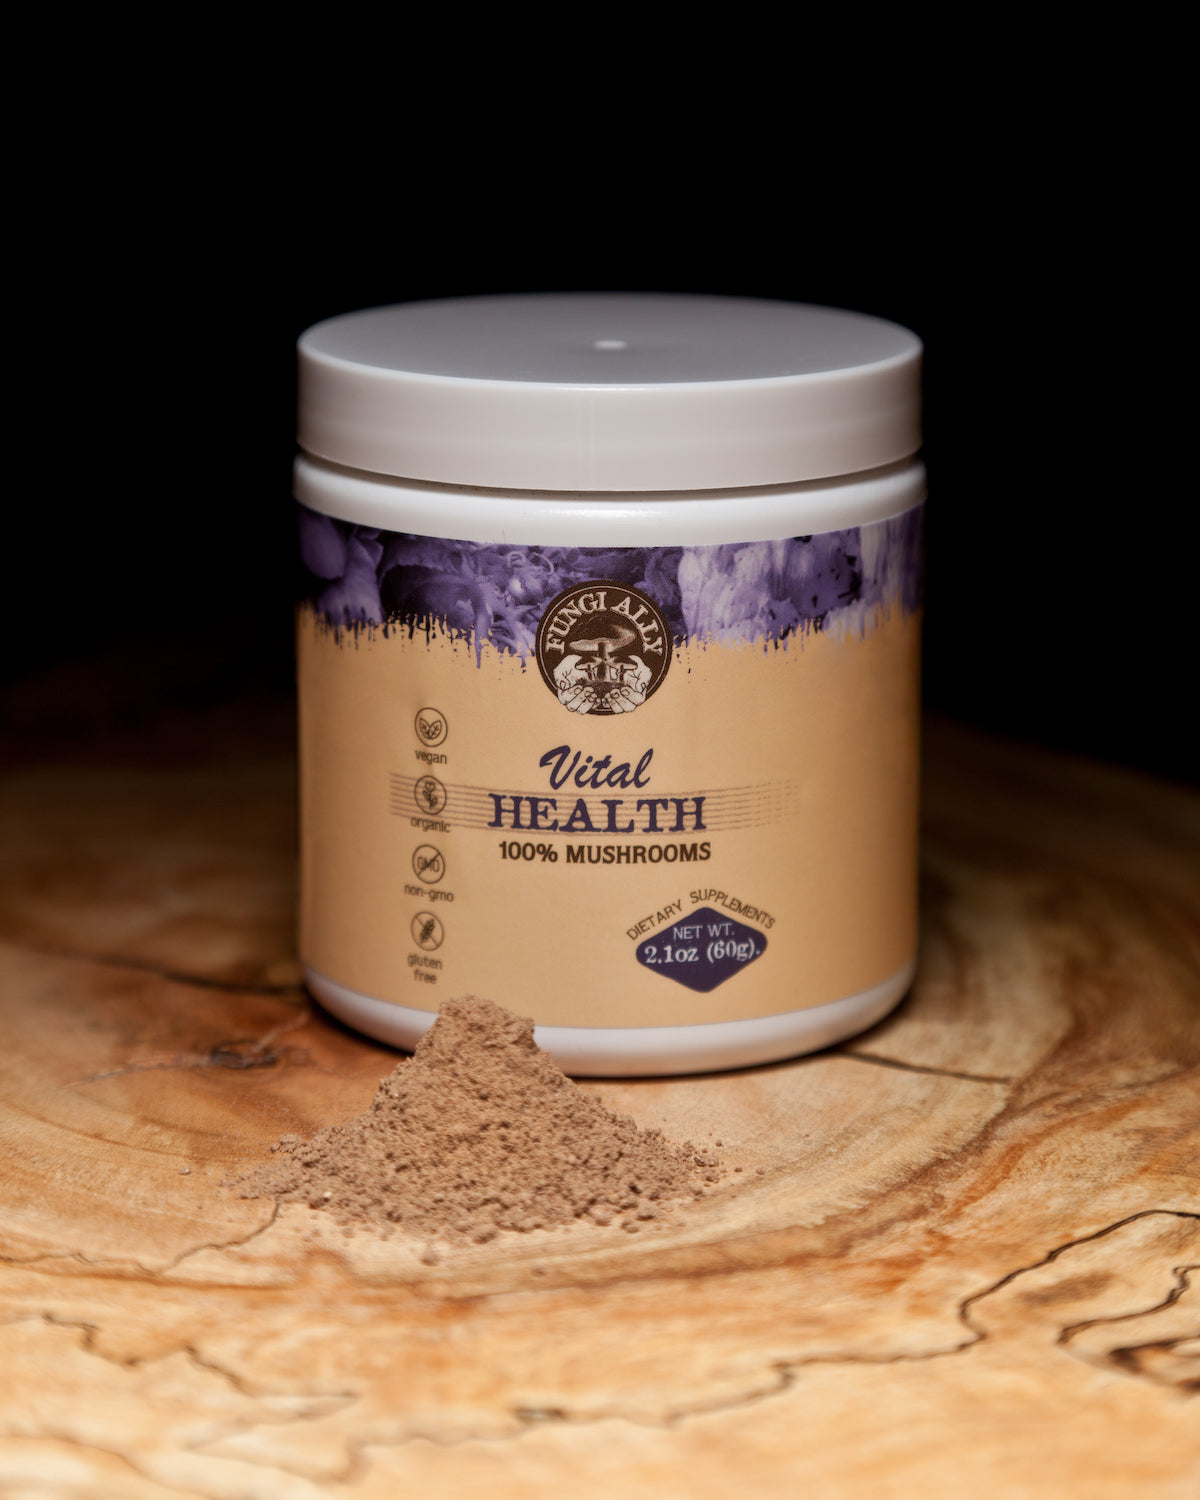 Experience our Vital Health Mushroom Blend Extract Powder (60 grams)